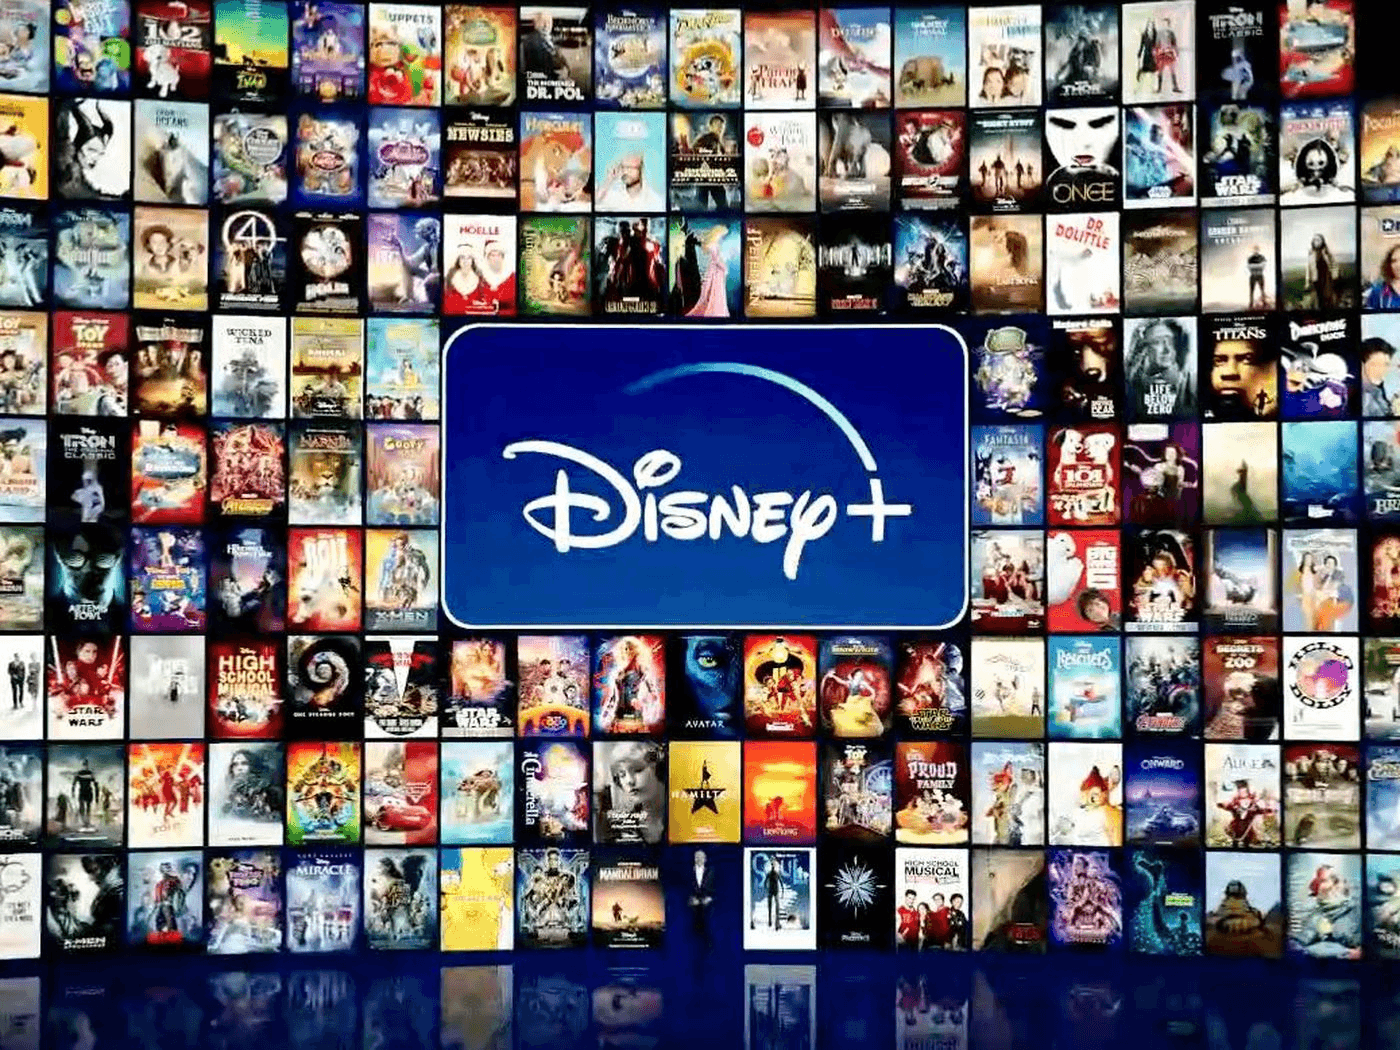 Watch Disney + on four streaming devices simultaneously